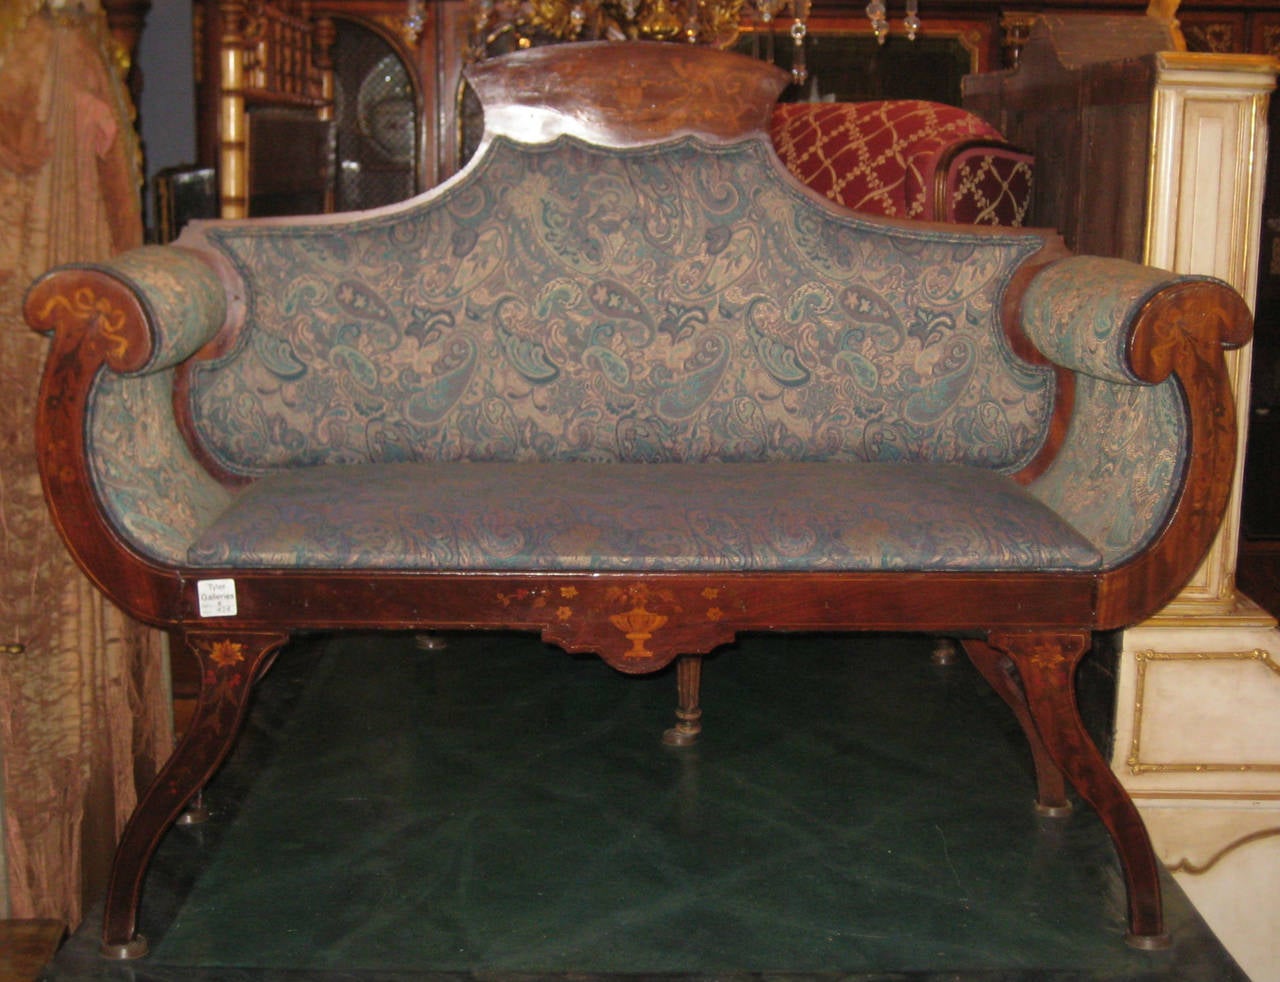 A beautiful inlaid mahogany settee, the shaped crest rail inlaid with a flowering urn flanked by birds and foliage above a shaped backrest, cornucopia shape arms inlaid with ribbons, flowerheads and trails, the seat rail centering a flowering urn